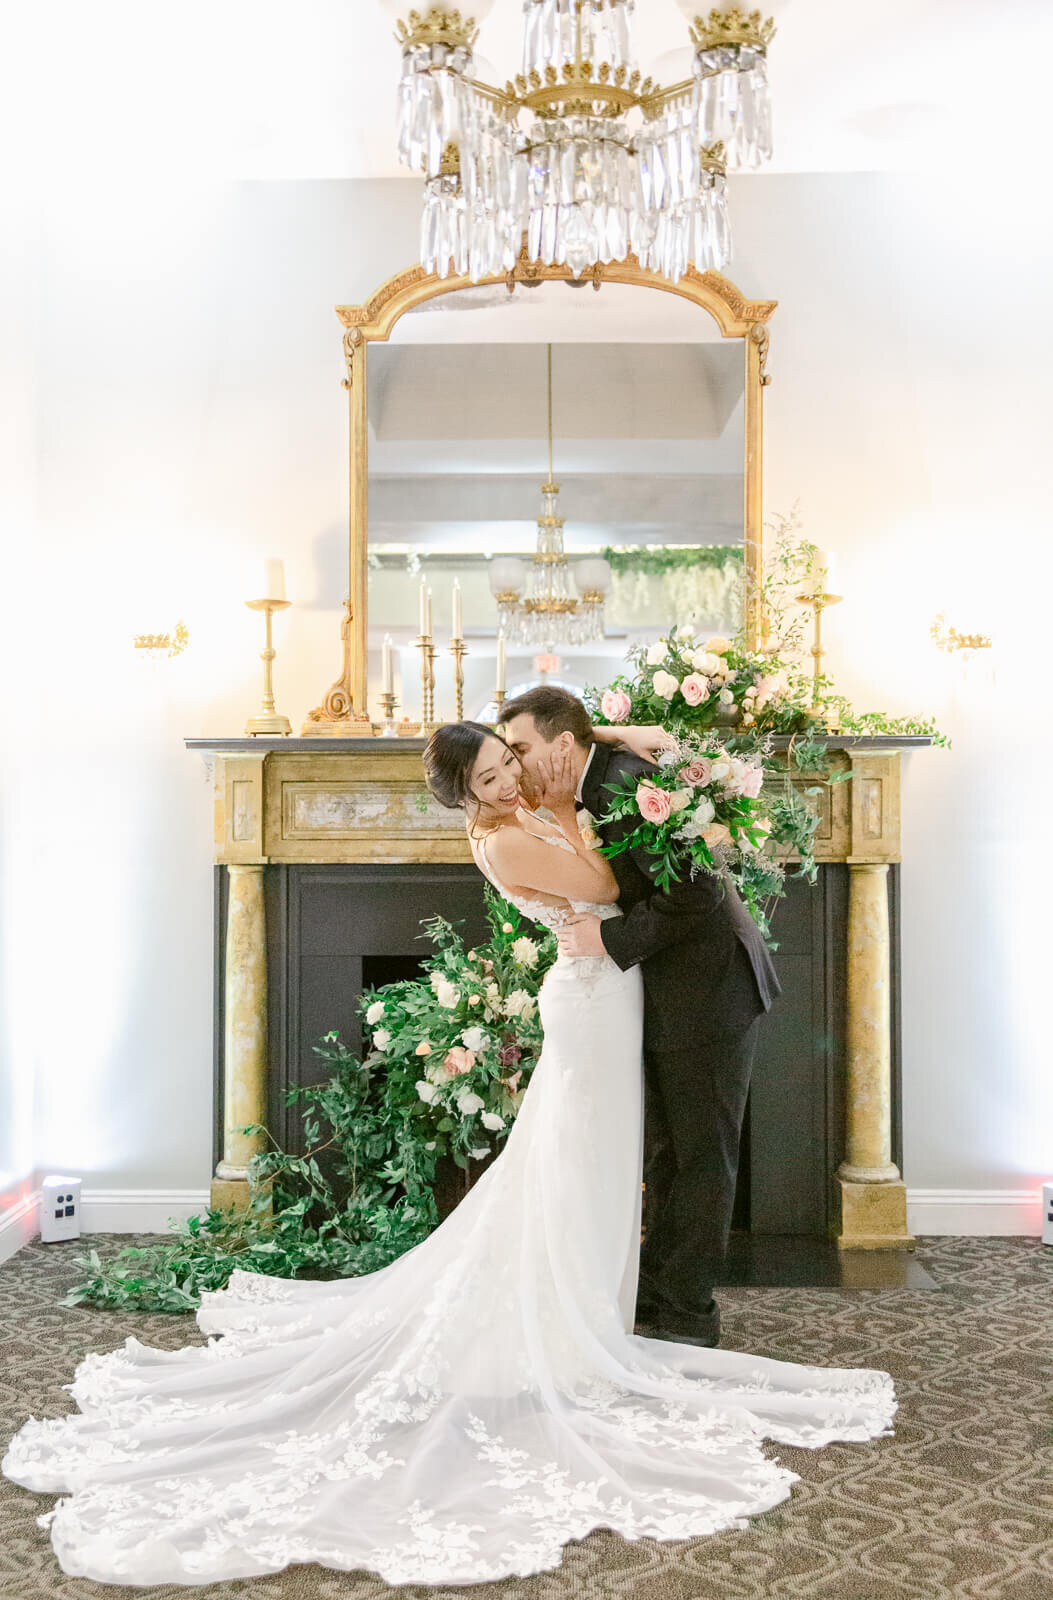 Groom kissing bride's cheek in front of the fireplace at Ceresville Mansion in Frederick, Maryland. Takne by Bethany Aubre Photography.